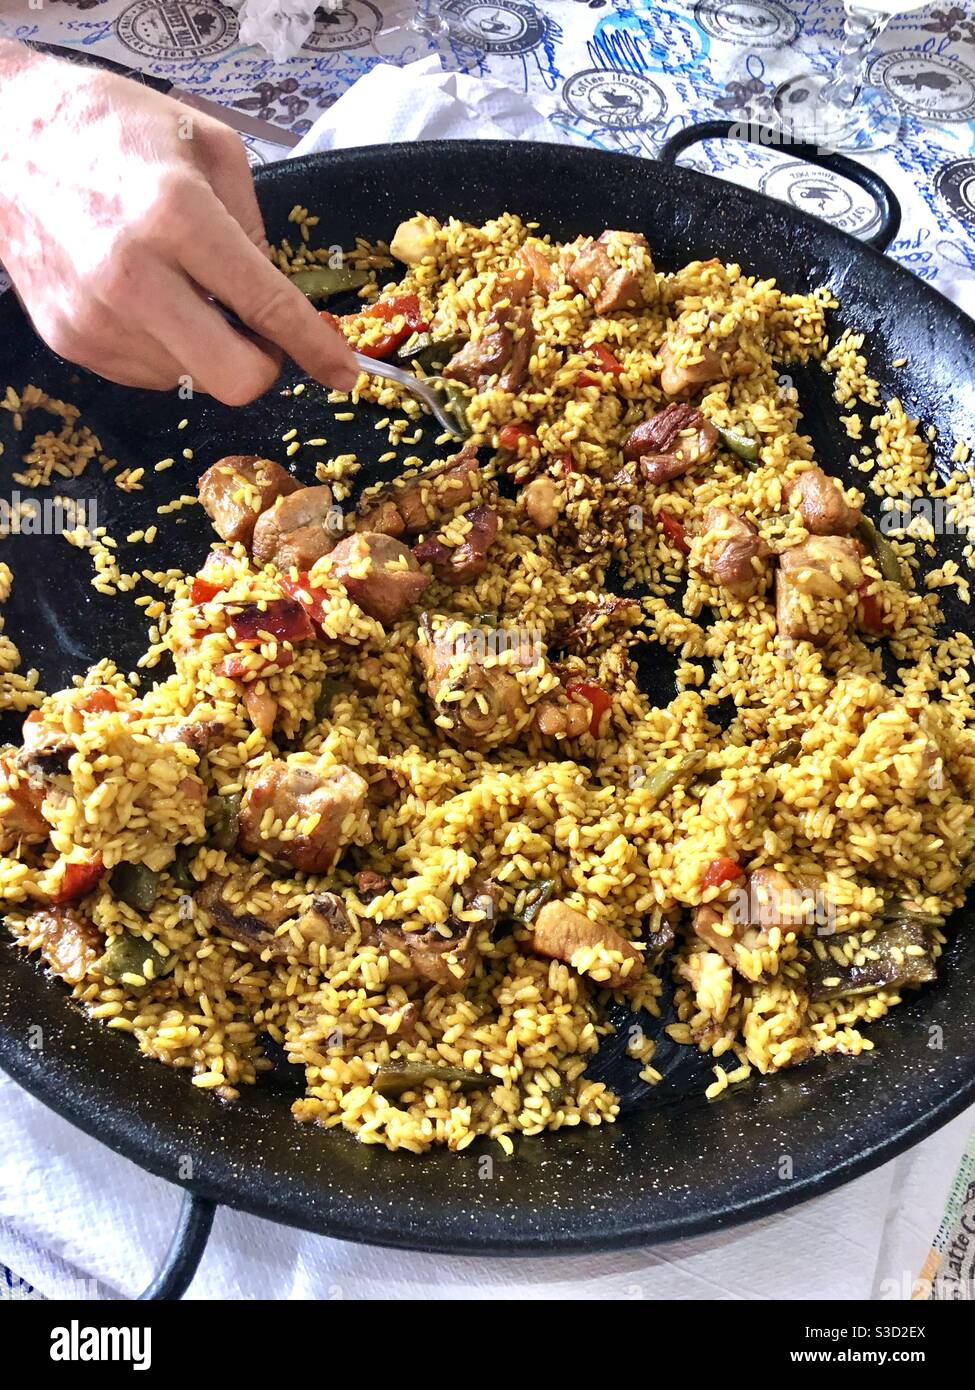 Person with a fork eating paella Stock Photo